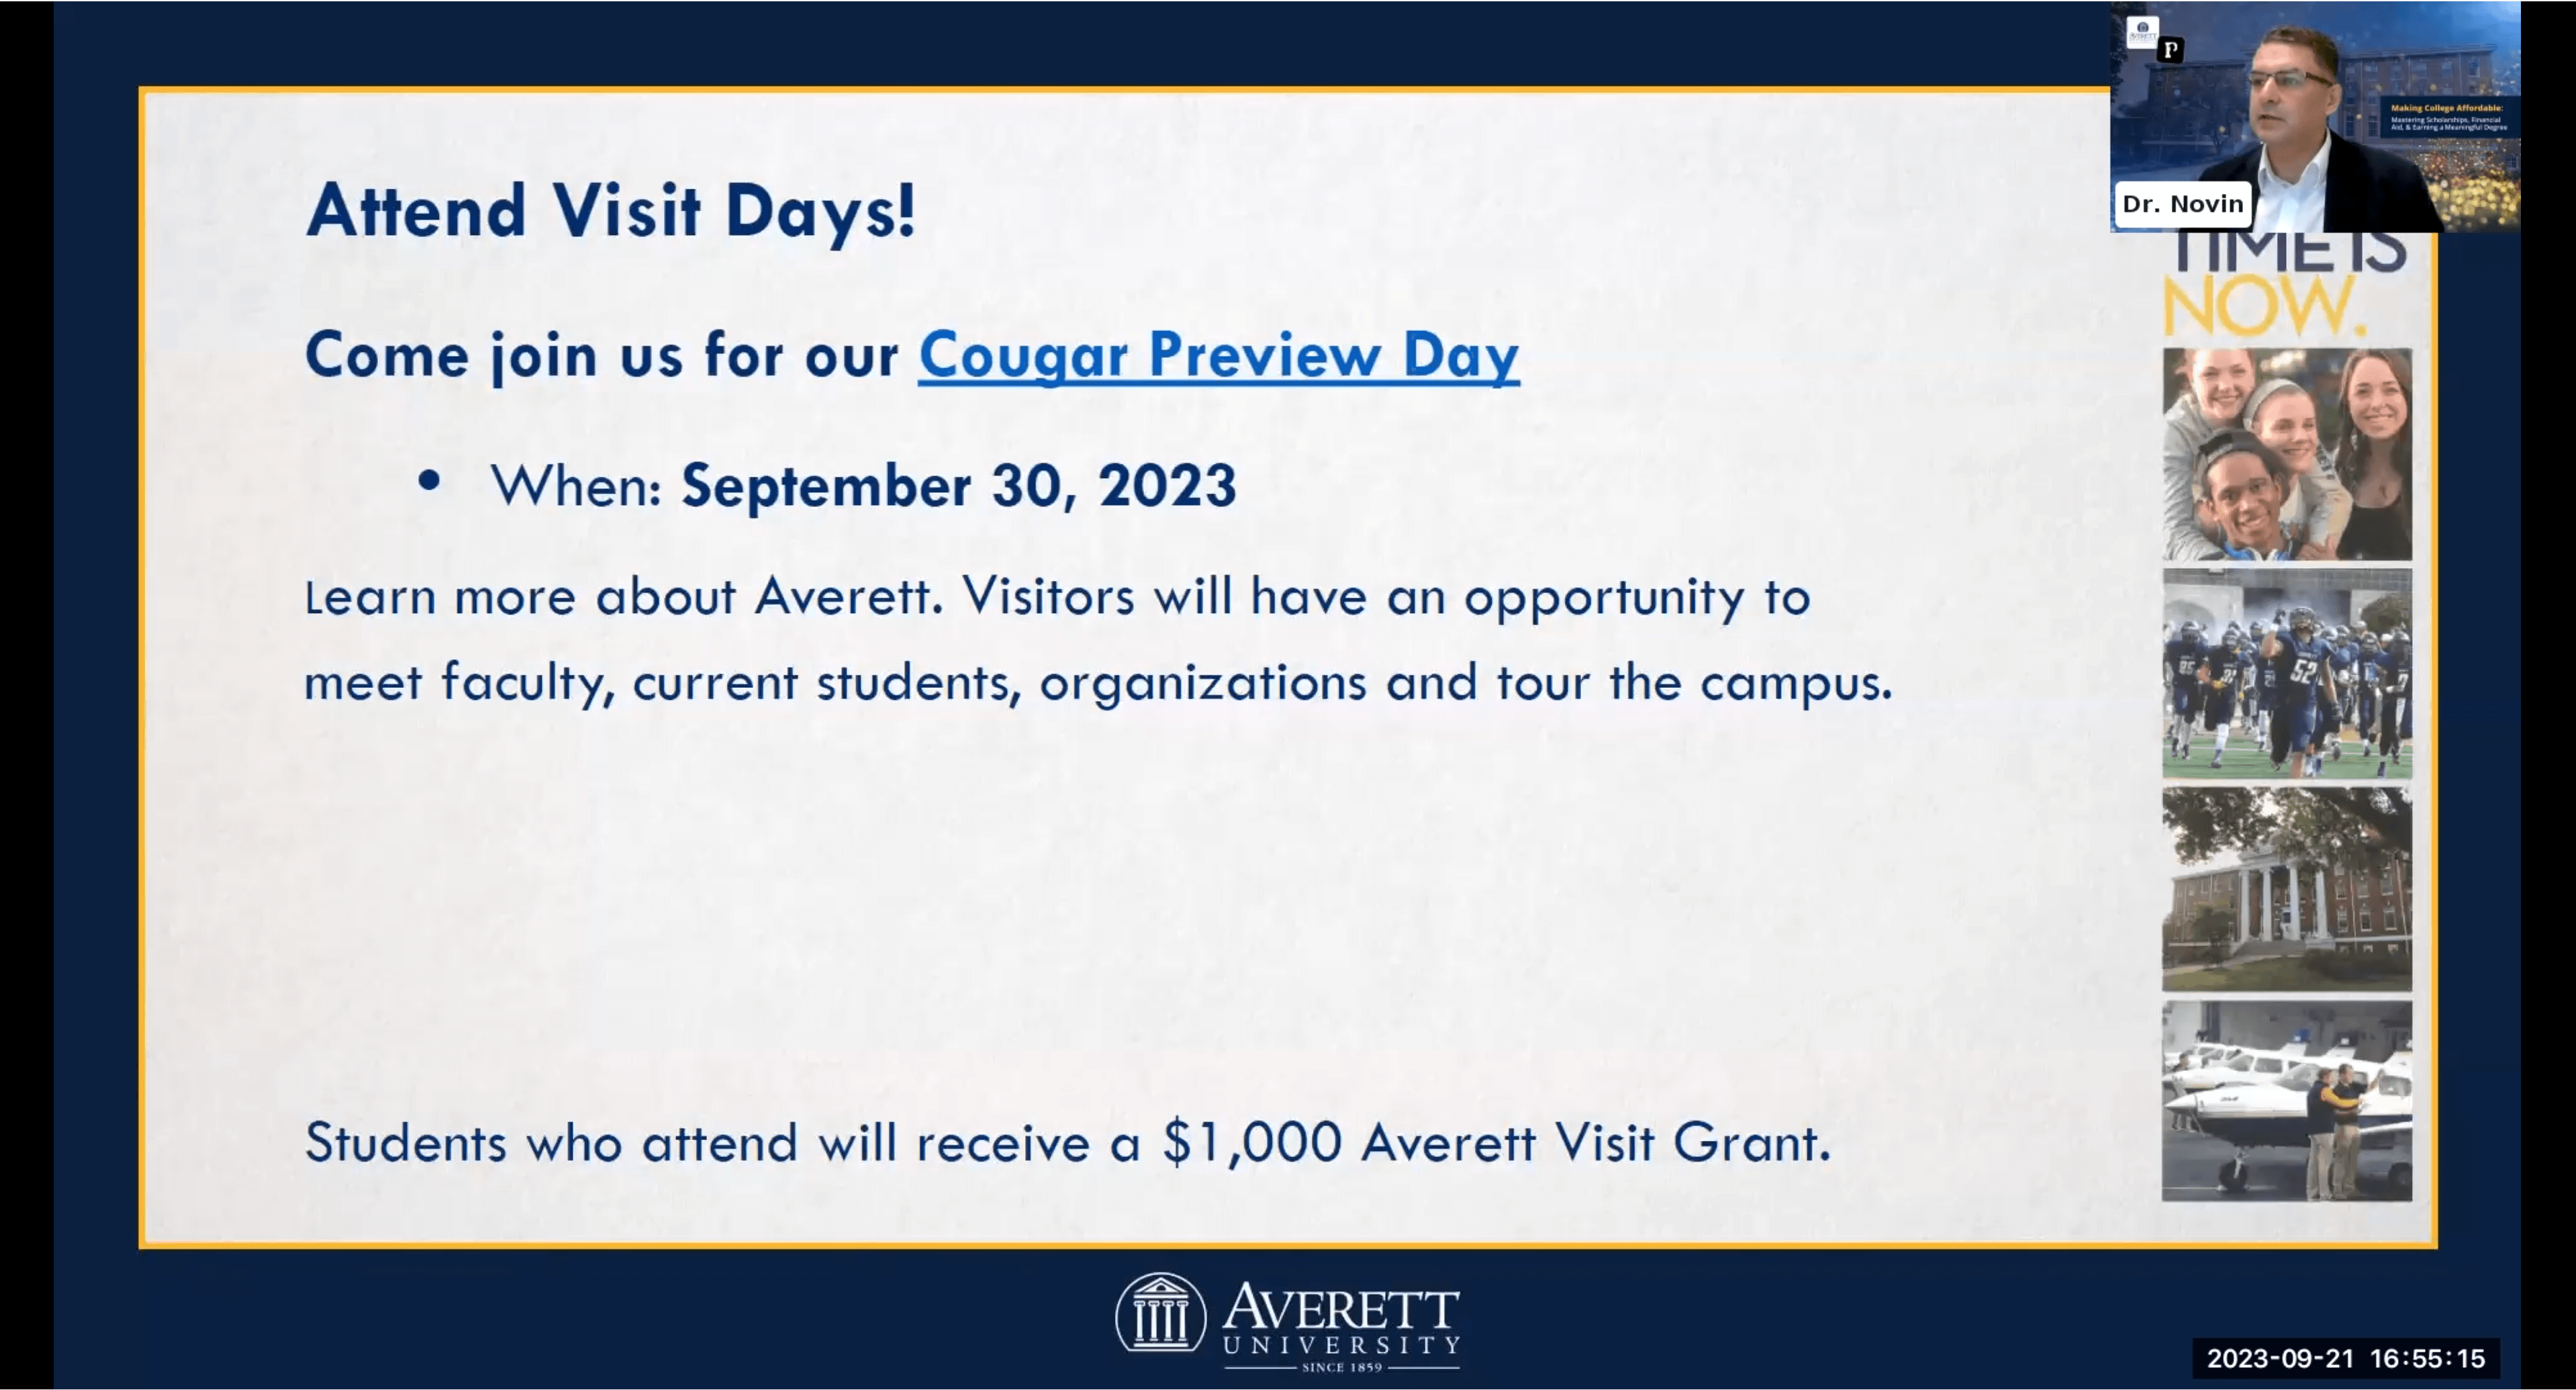 Upcoming Averett on-campus visit on September 30th, 2023. Frequent visits. Opportunity to meet panel